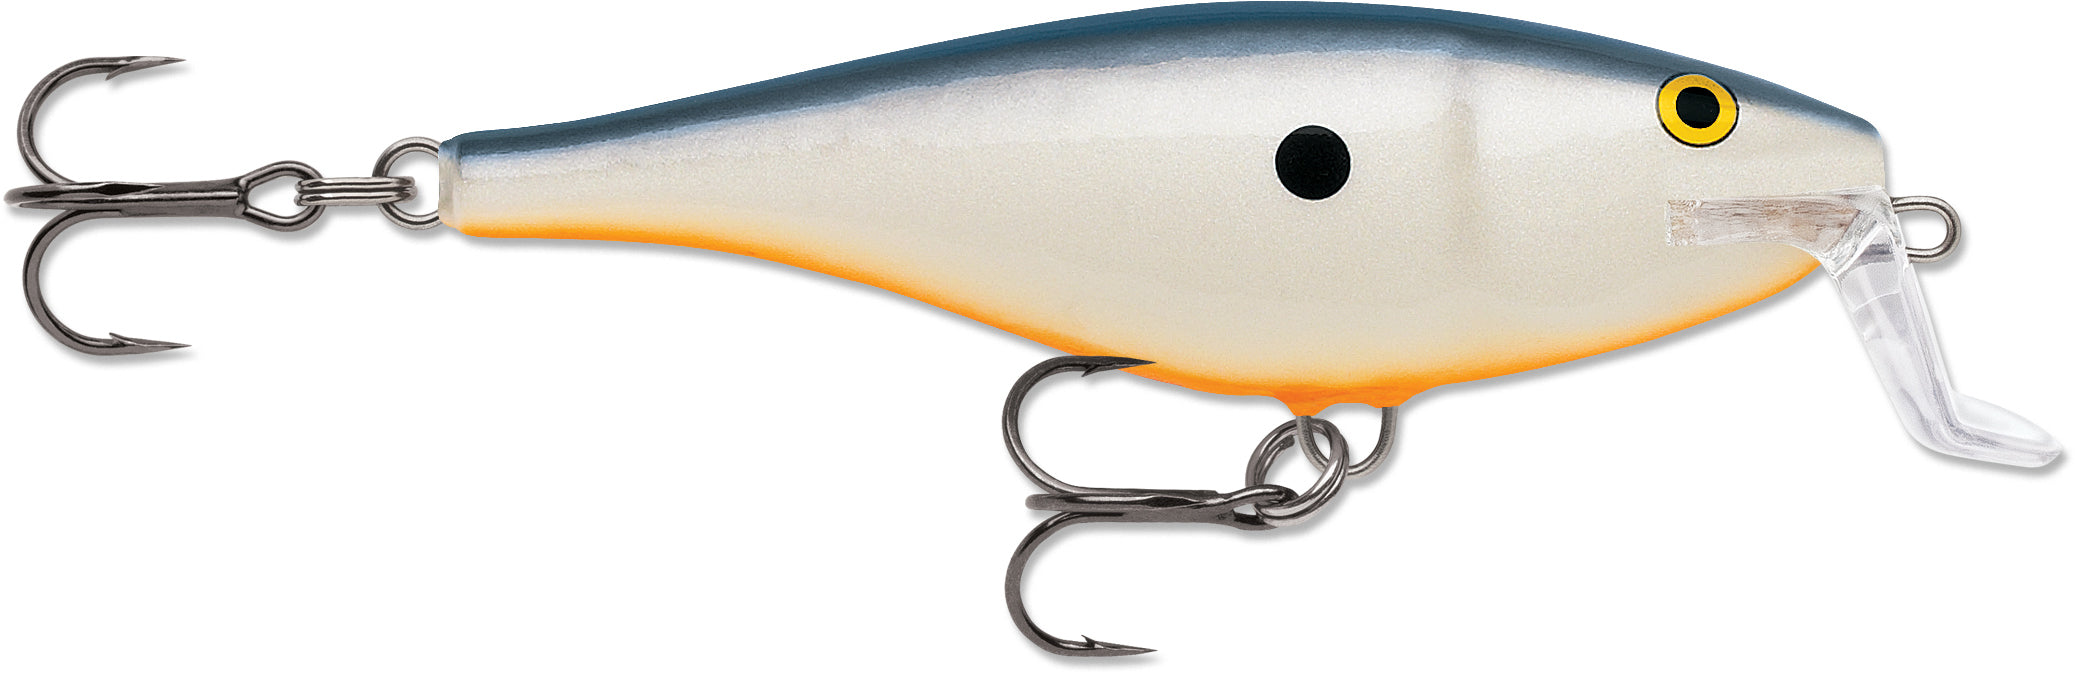  Rapala Shad Rap Lure, Freshwater, Size 06, 2 1/2 Length,  5'-10' Depth, Crawdad, Package of 1 : Fishing Topwater Lures And Crankbaits  : Sports & Outdoors